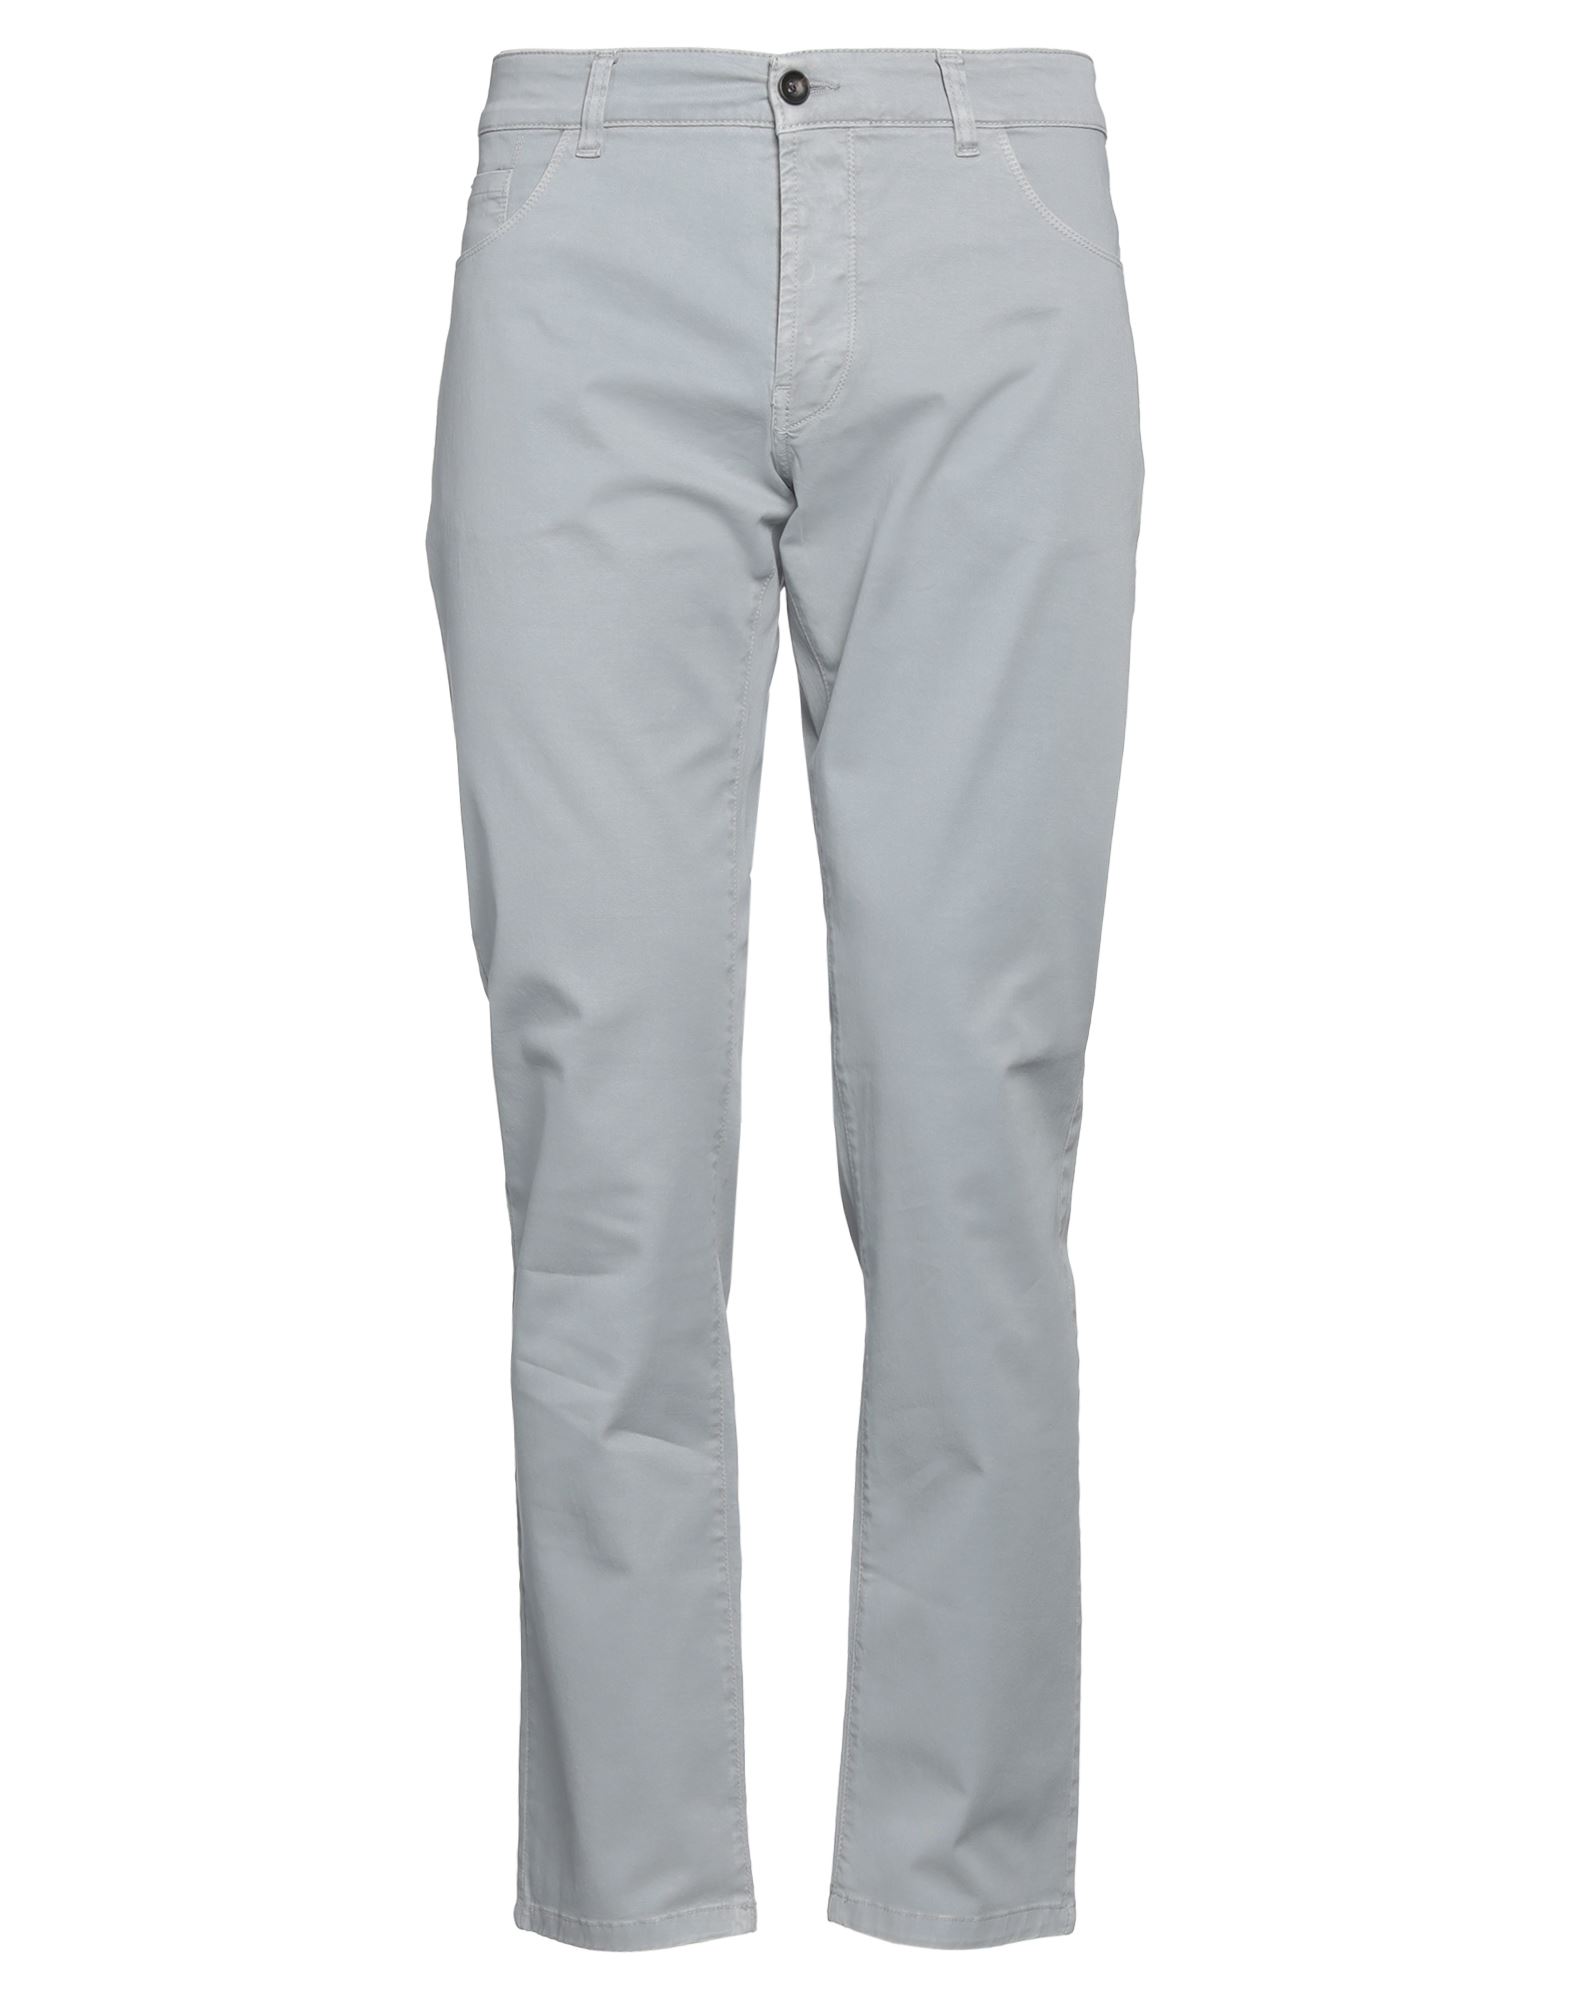 New England Pants In Grey